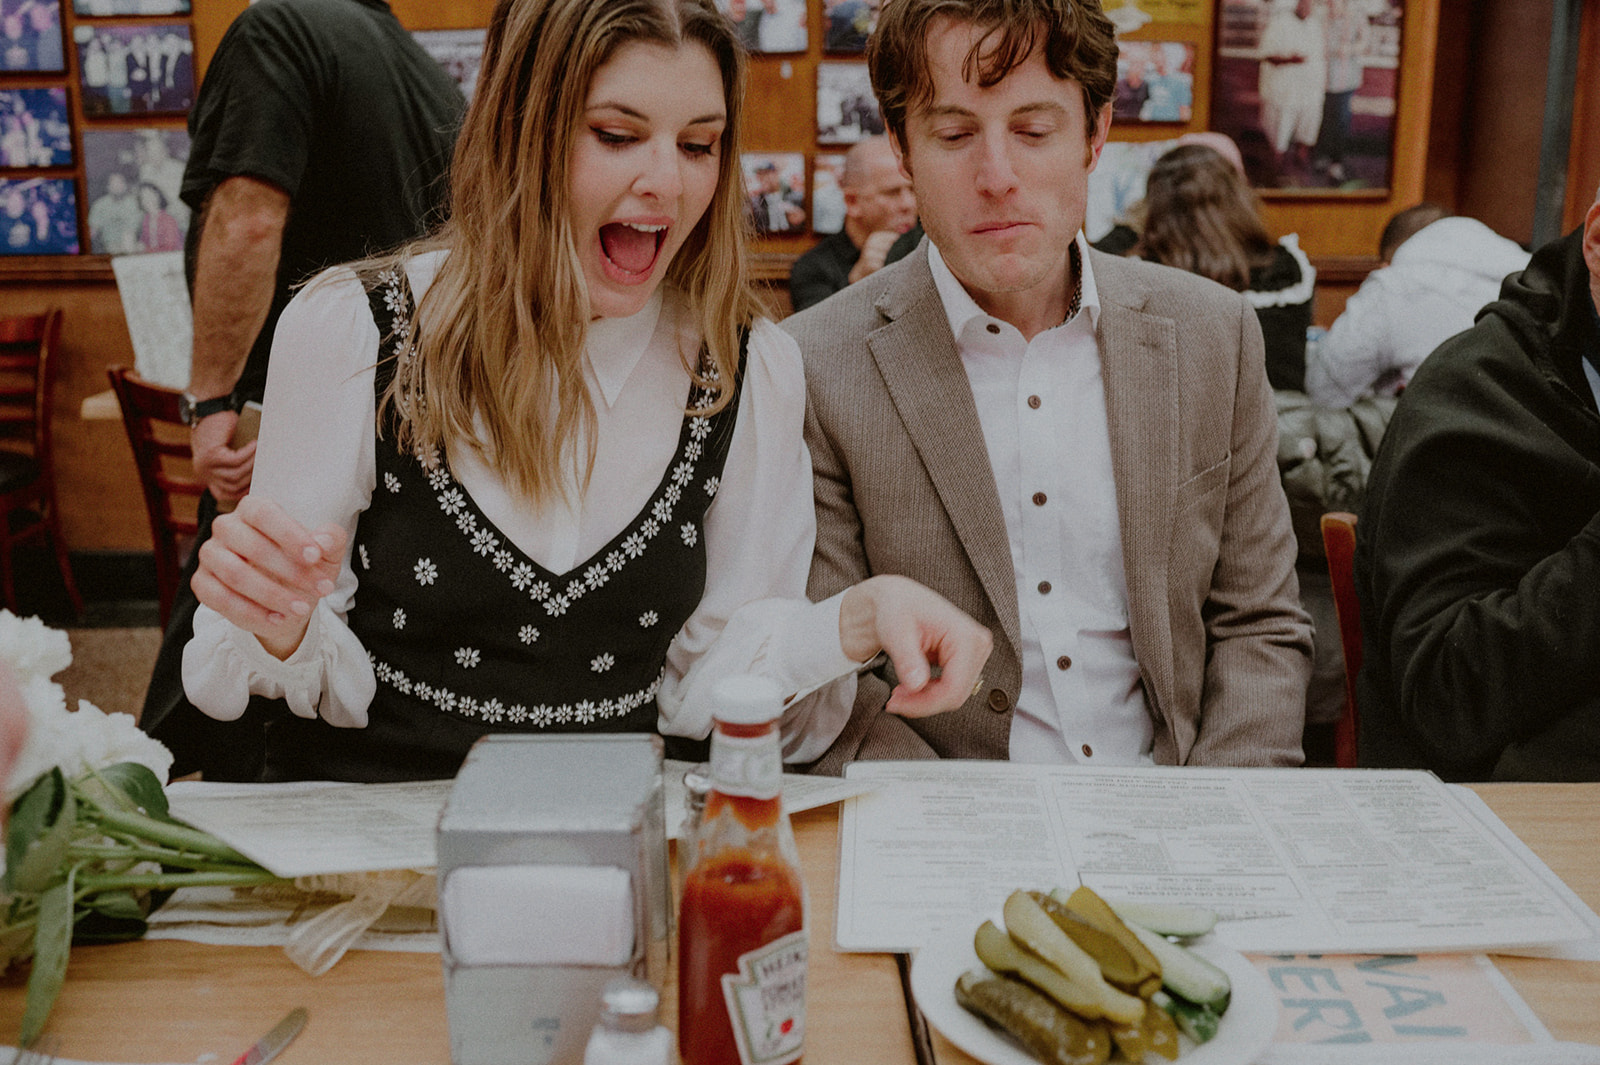 couple looking at the katz deli menu with an exaggerated expression